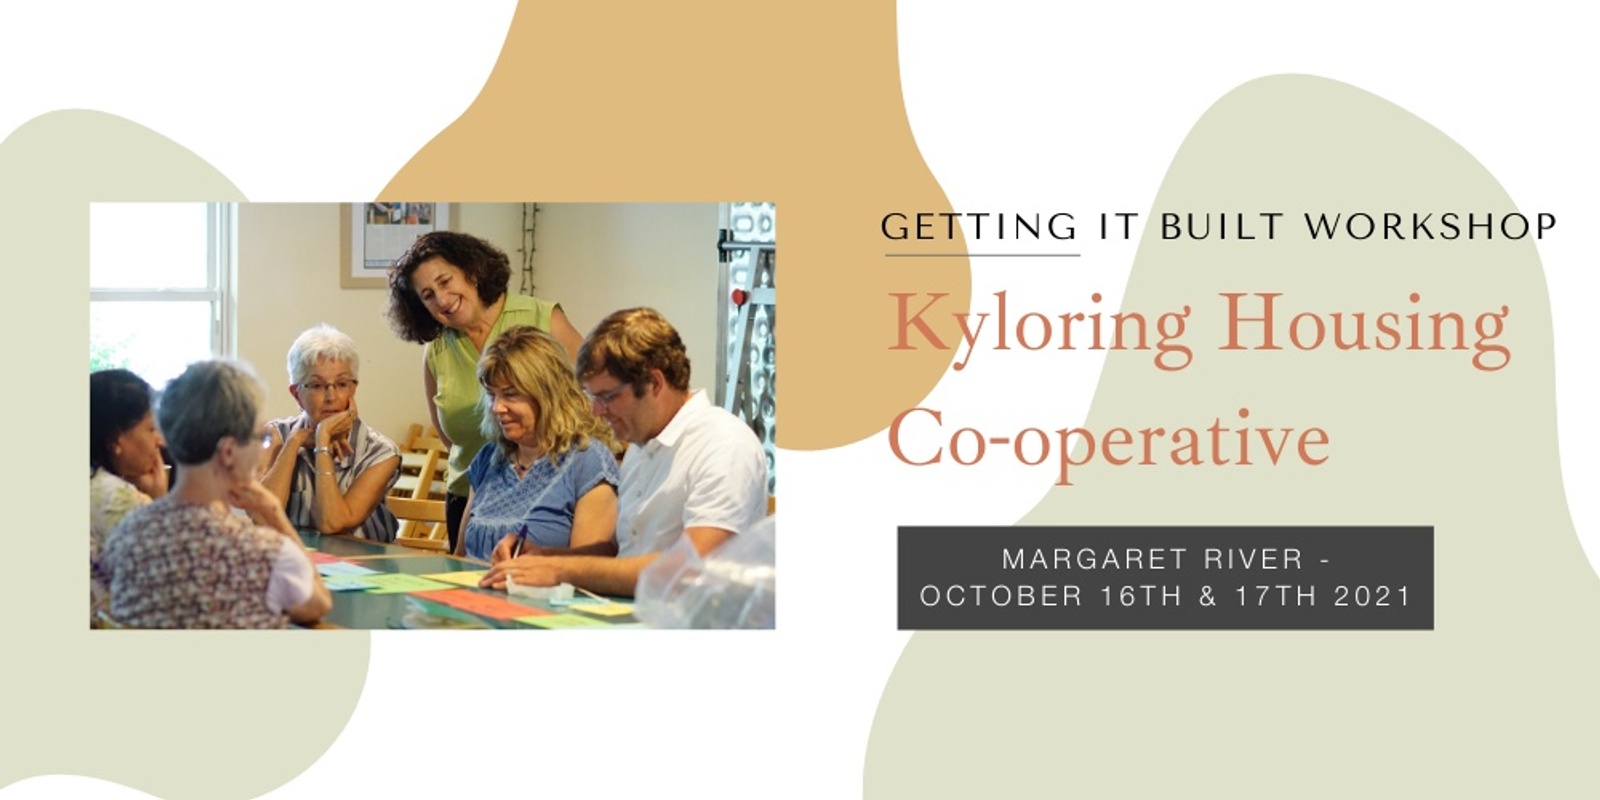 Banner image for Kyloring Housing Co-operative - Getting It Built Workshop